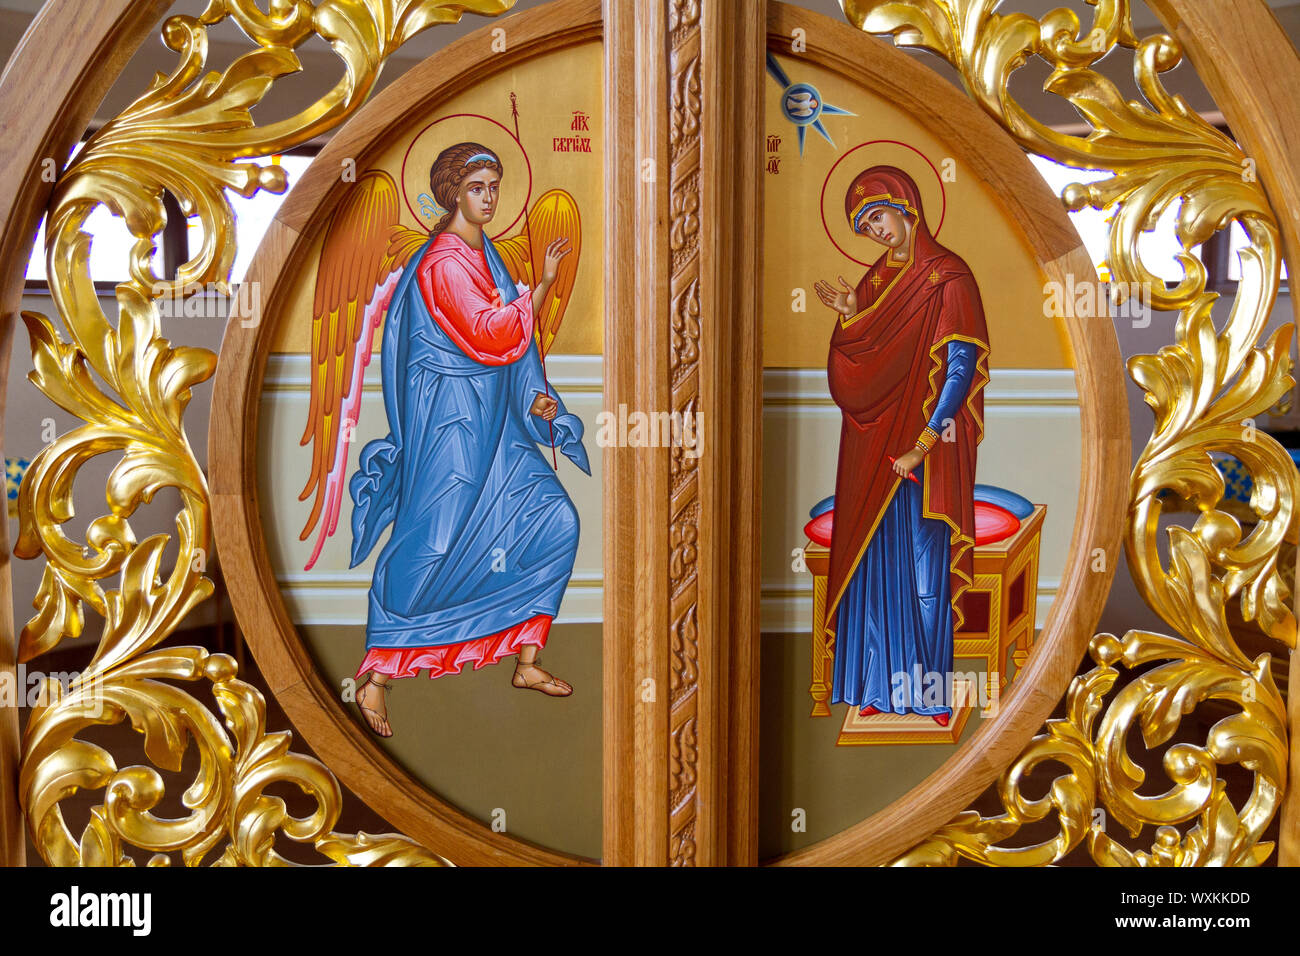 Icon of the Annunciation – the announcement by the Archangel Gabriel to the Virgin Mary that she would conceive and become the mother of Jesus. Stock Photo